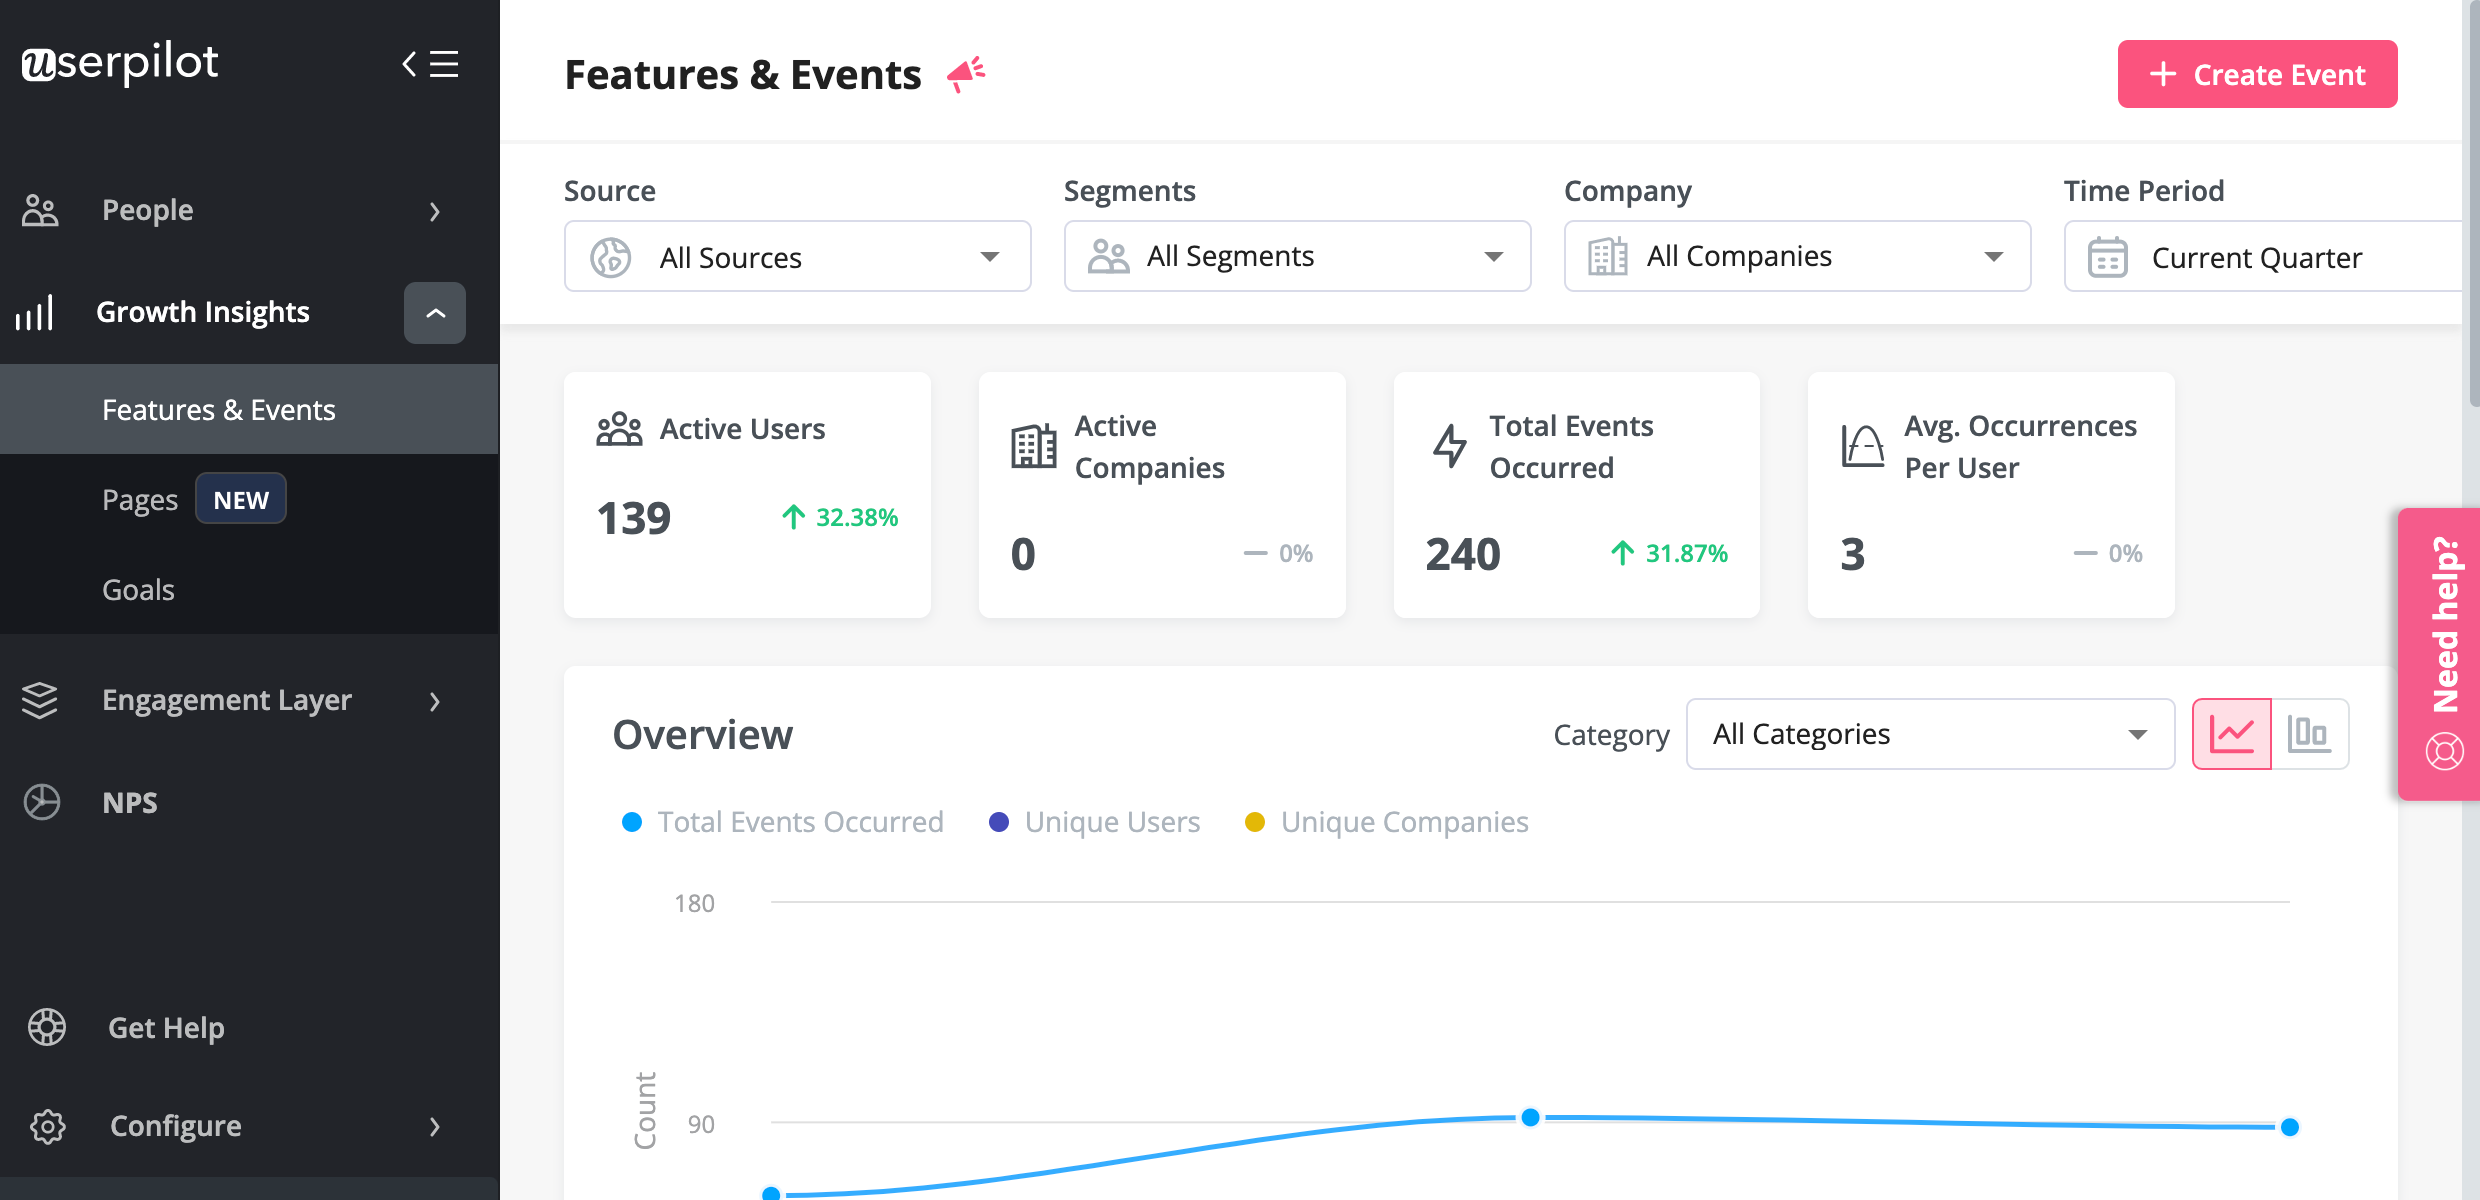 userpilot features and events tracking dashboard